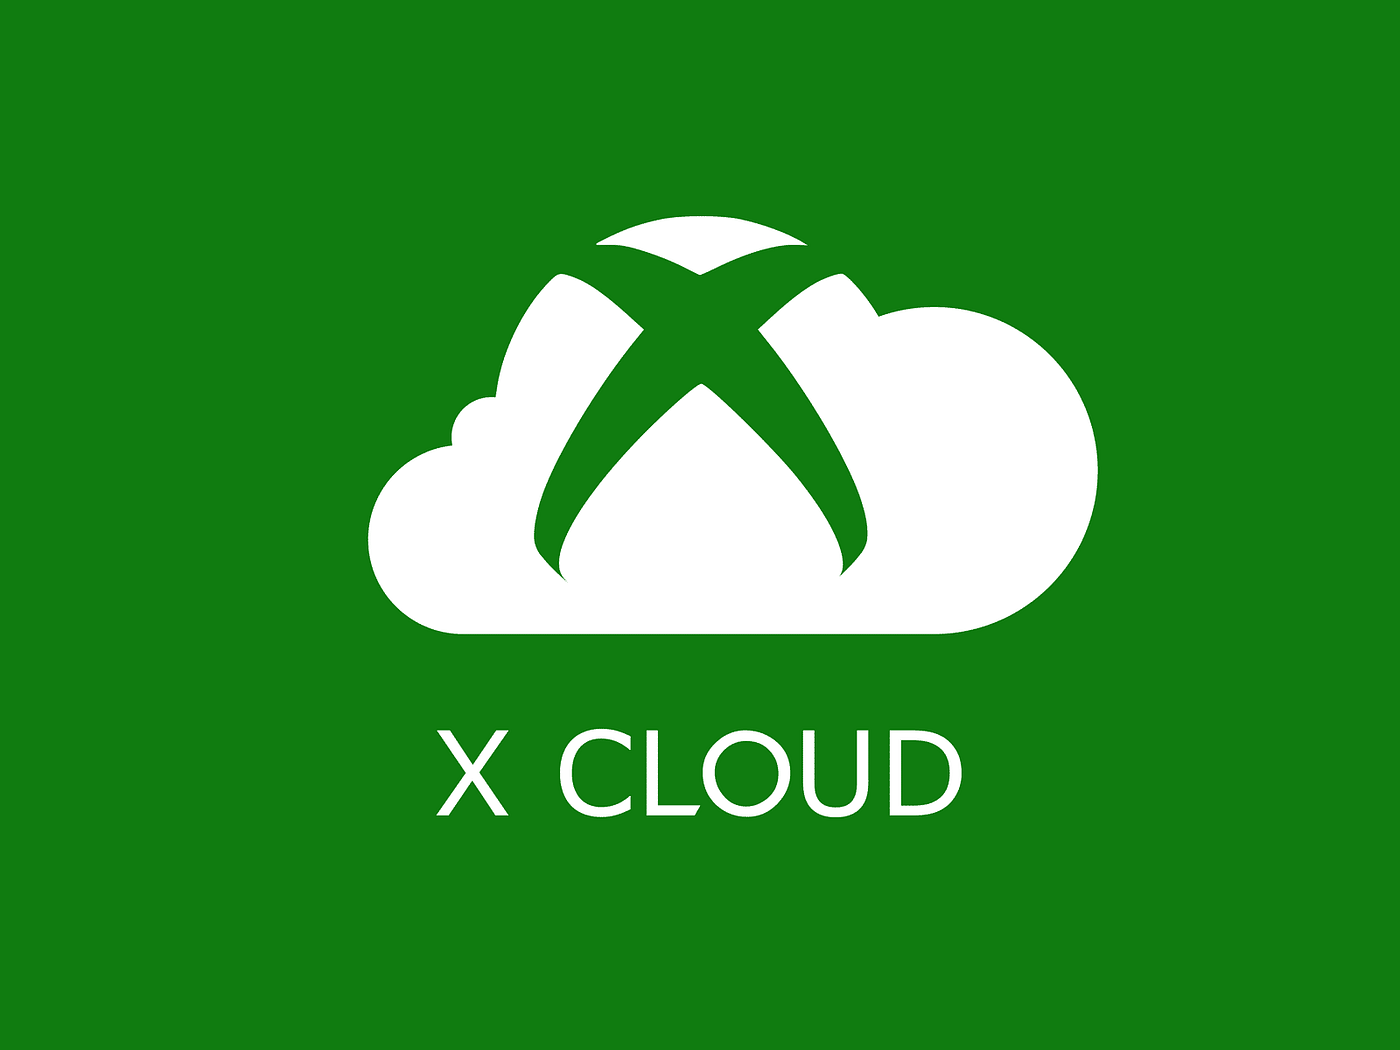 Microsoft Adds xCloud Support to the Xbox App on Windows 10